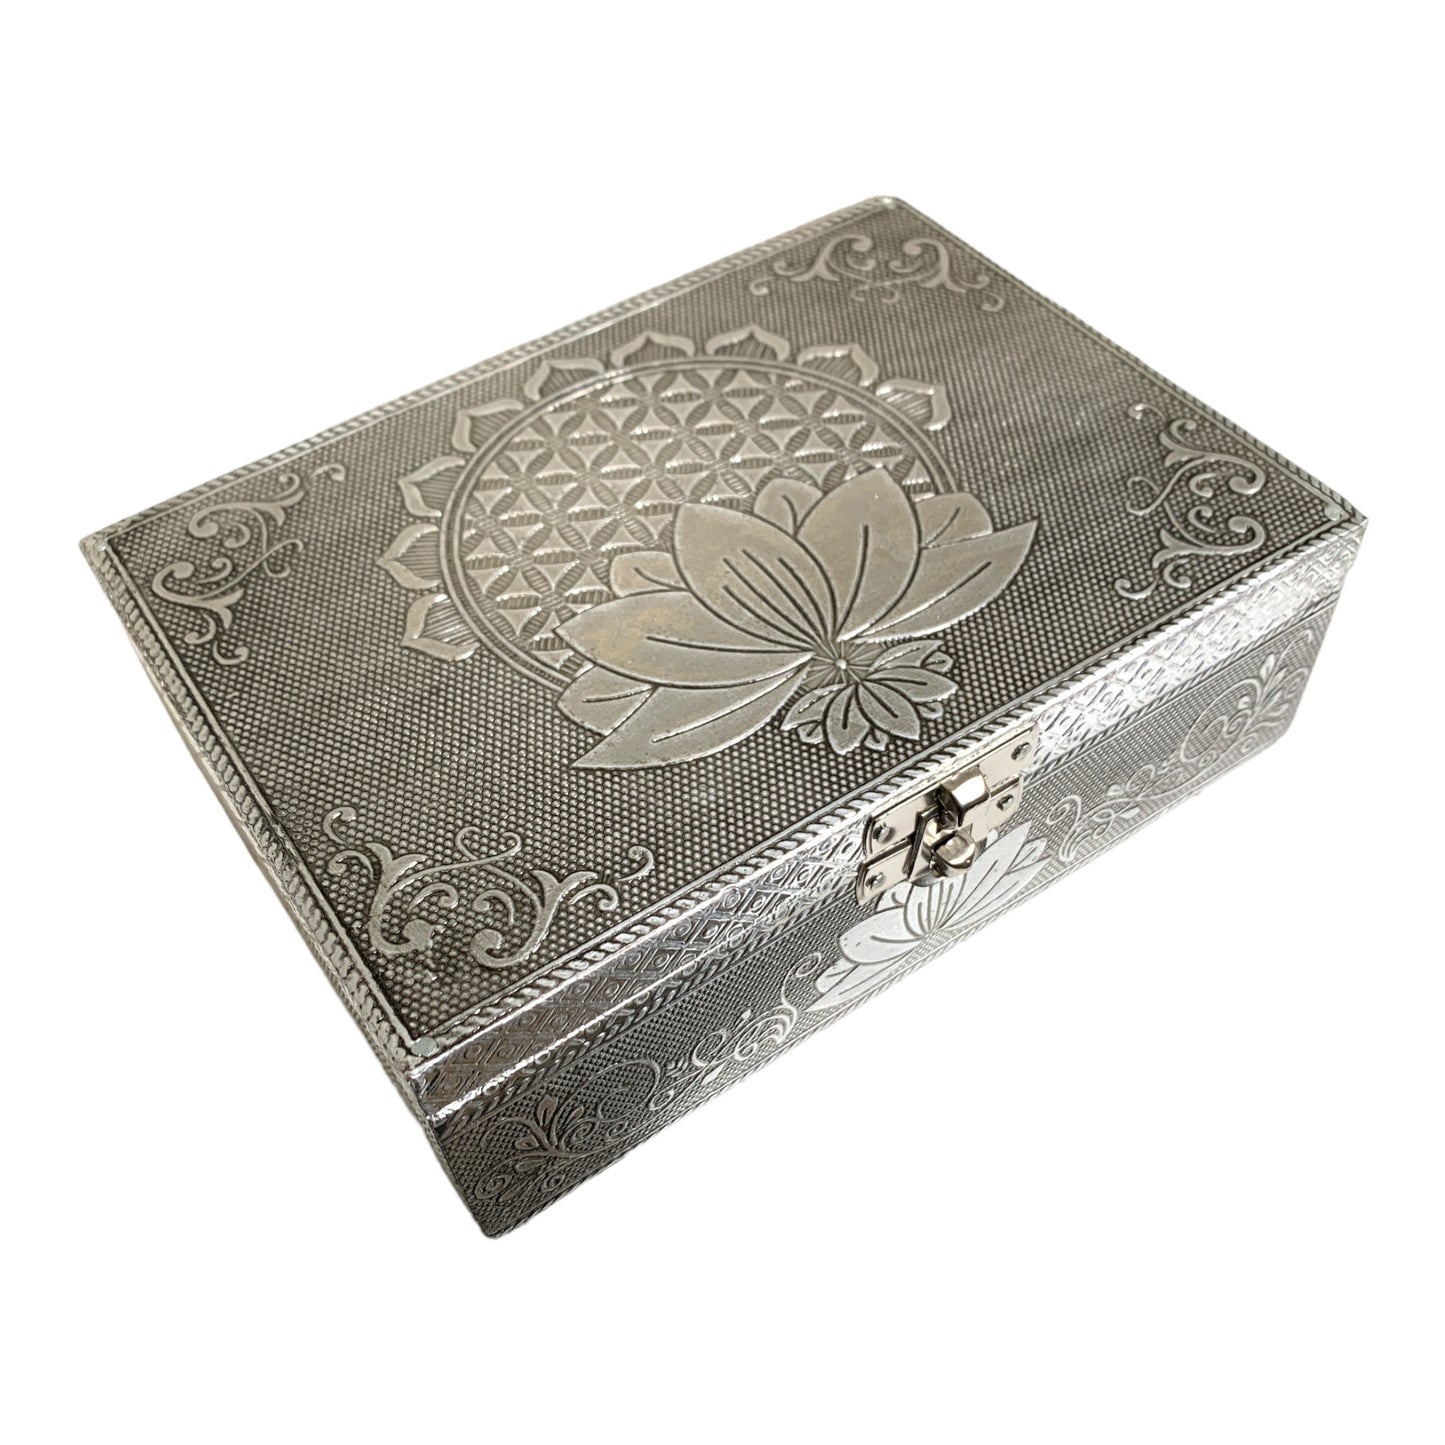 LOTUS Box - Carved METAL Over Wood - 4.75 x 6.75 inch - NEW1221